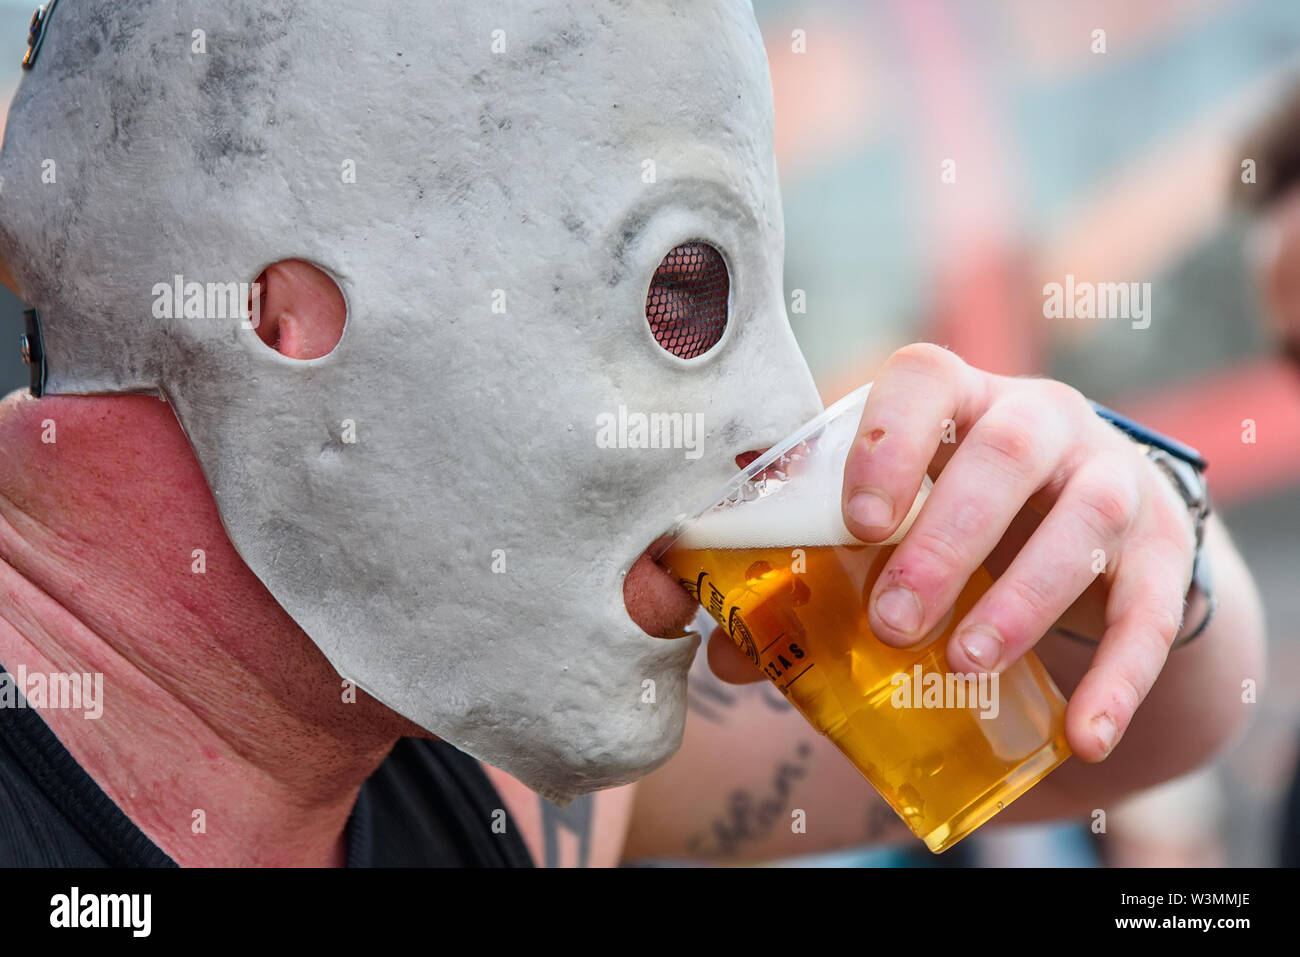 MADRID - JUN 30: A fan with the Slipknot mask drinks beer in a concert at Download (heavy metal music festival) on June 30, 2019 in Madrid, Spain. Stock Photo